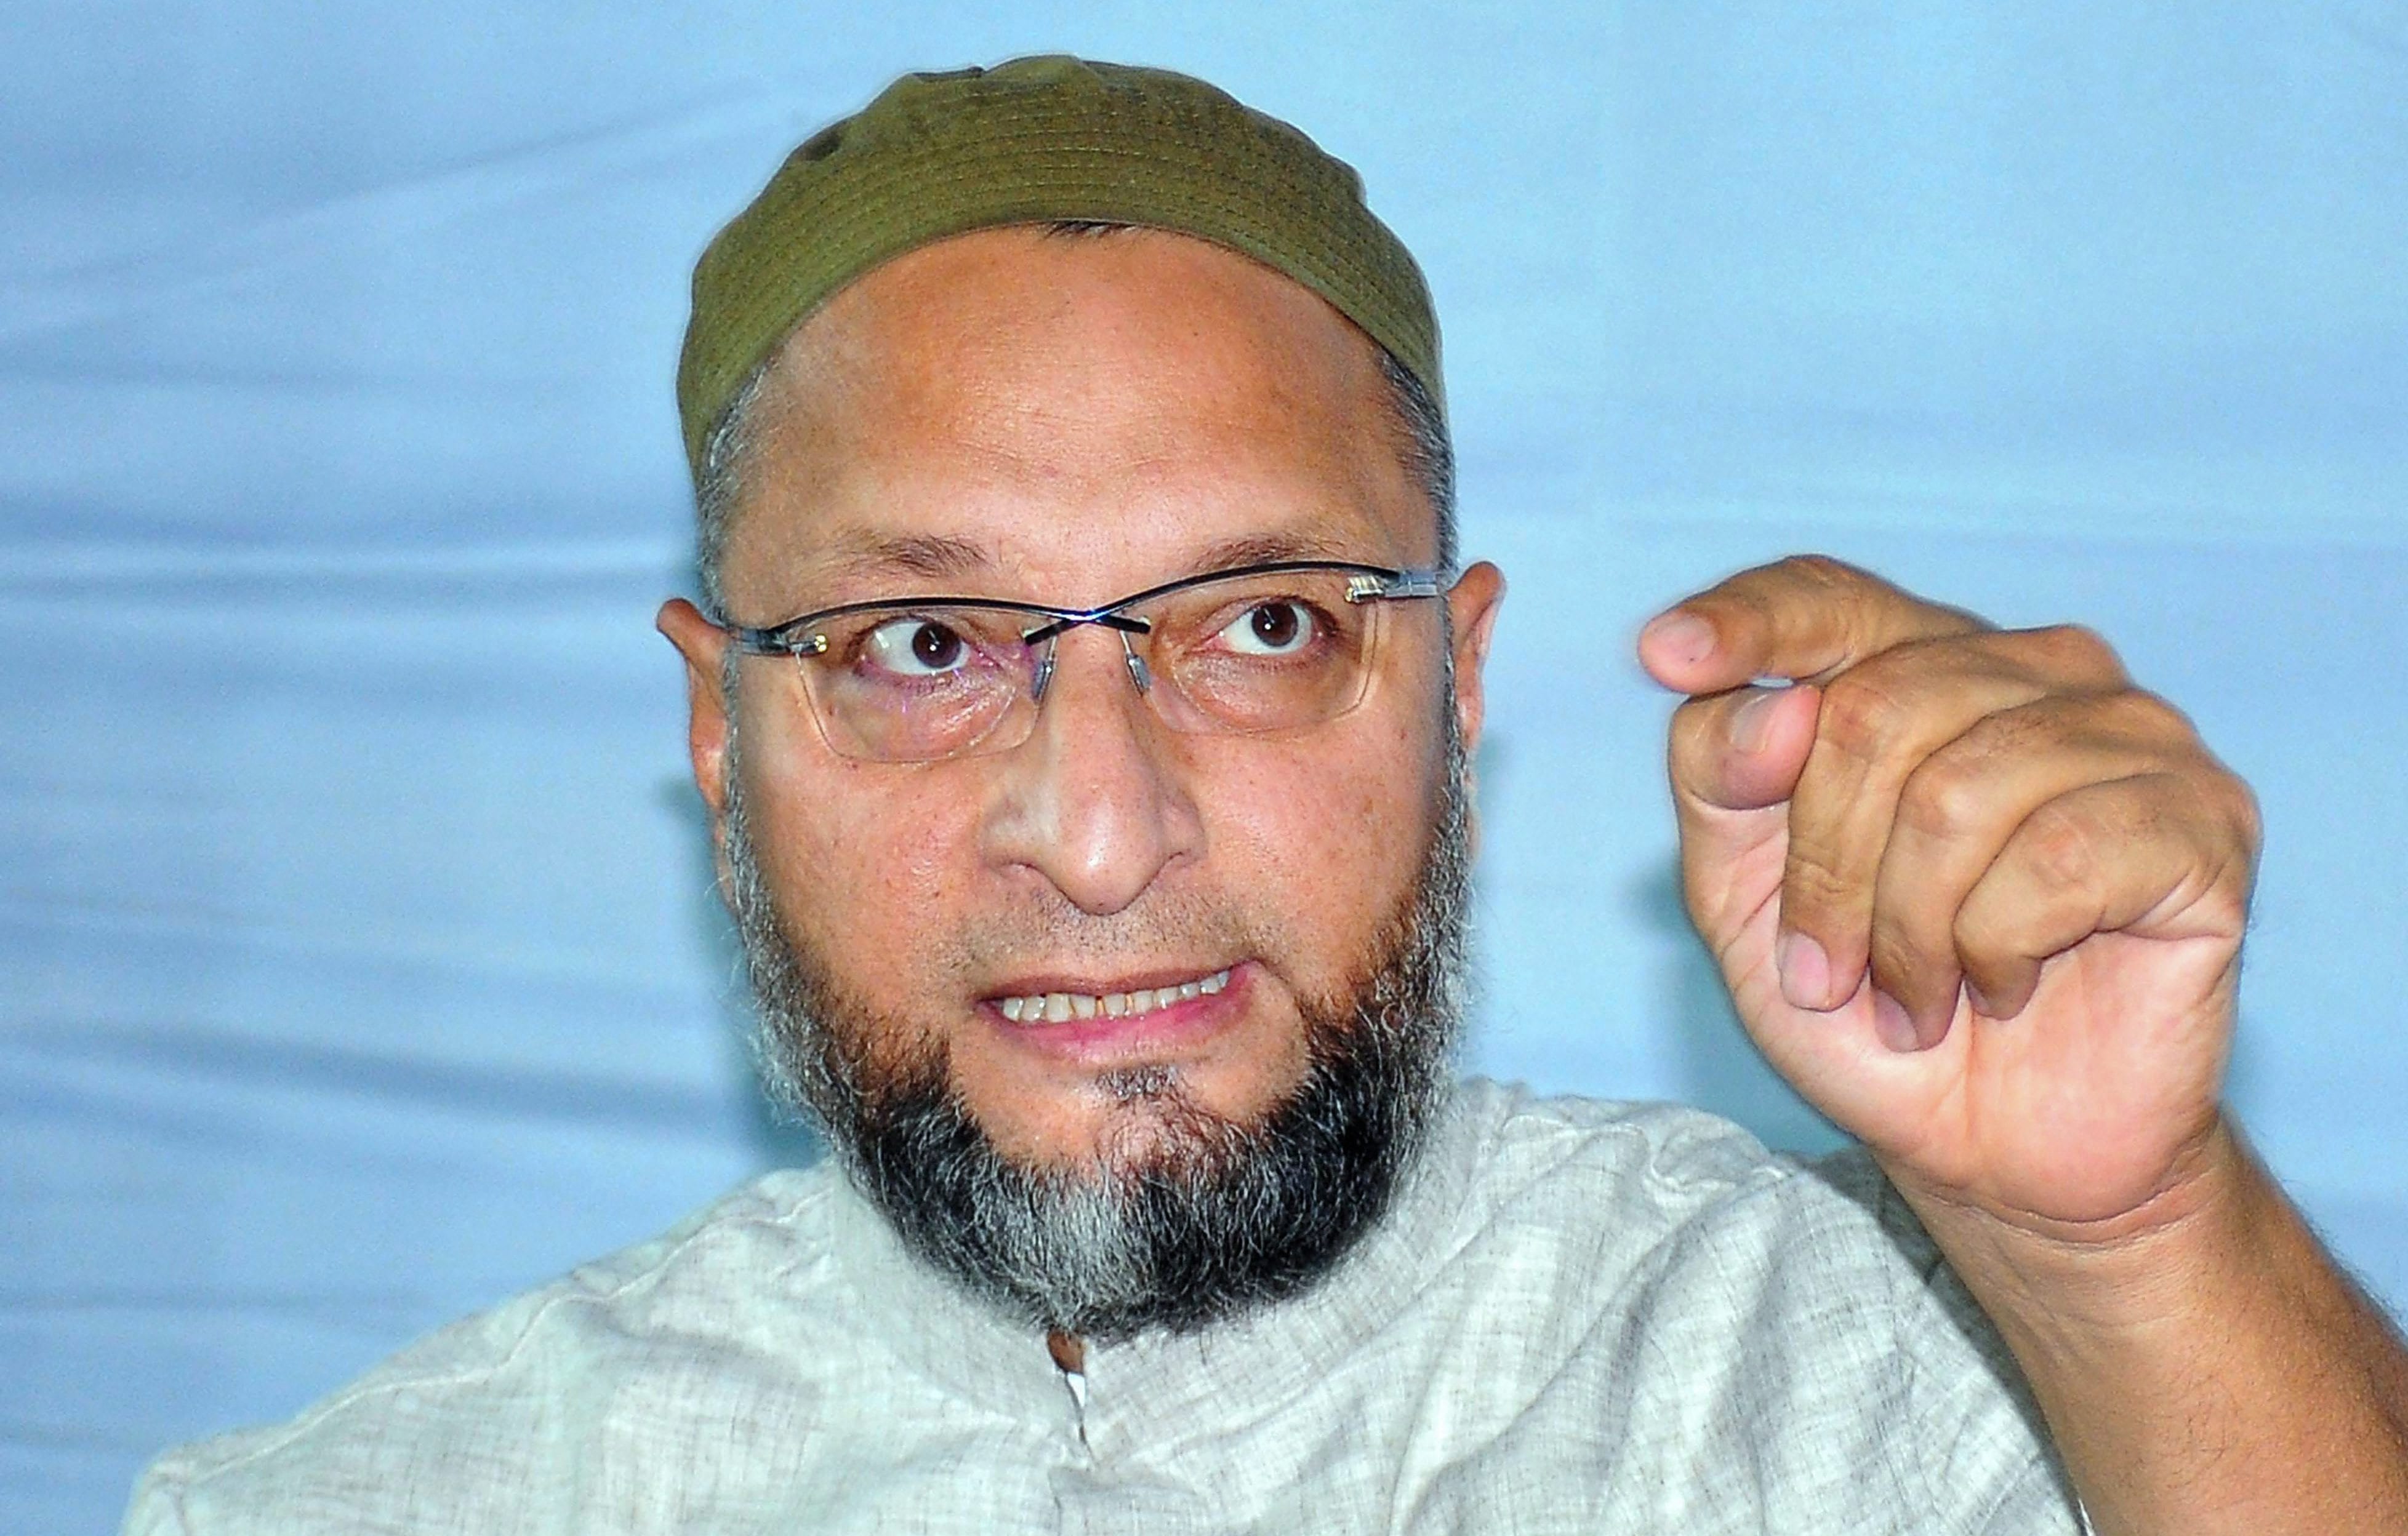 Big parties saw me as ‘untouchable’: Owaisi; his AIMIM a vote-cutter: Cong